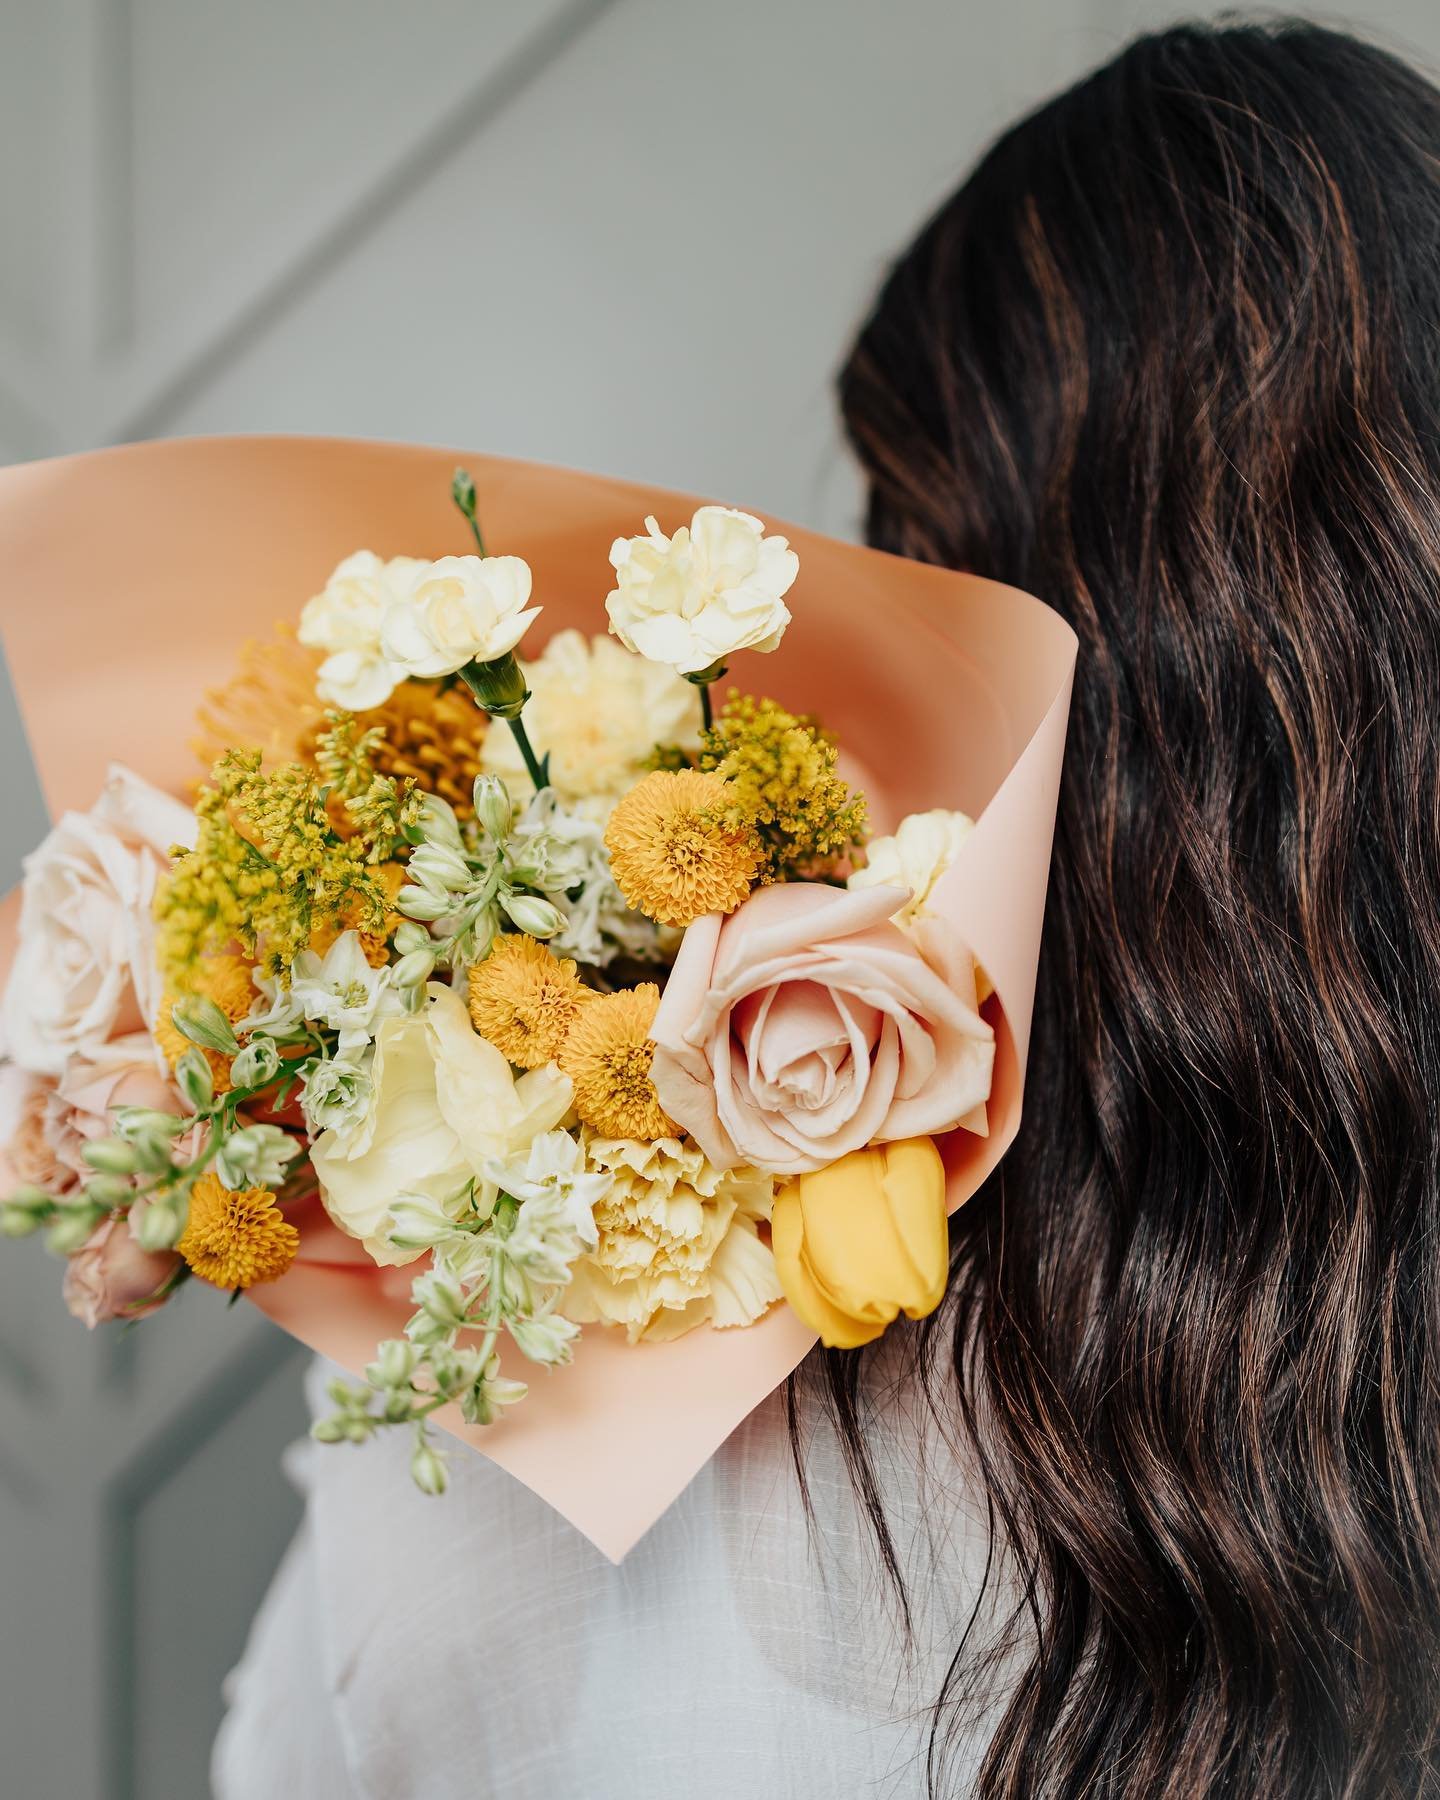 How lucky are we that even on the gloomiest days, flowers exist 🌧️🌸🌷🌼

https://thebouquetbarbyjre.com/all-subscriptions